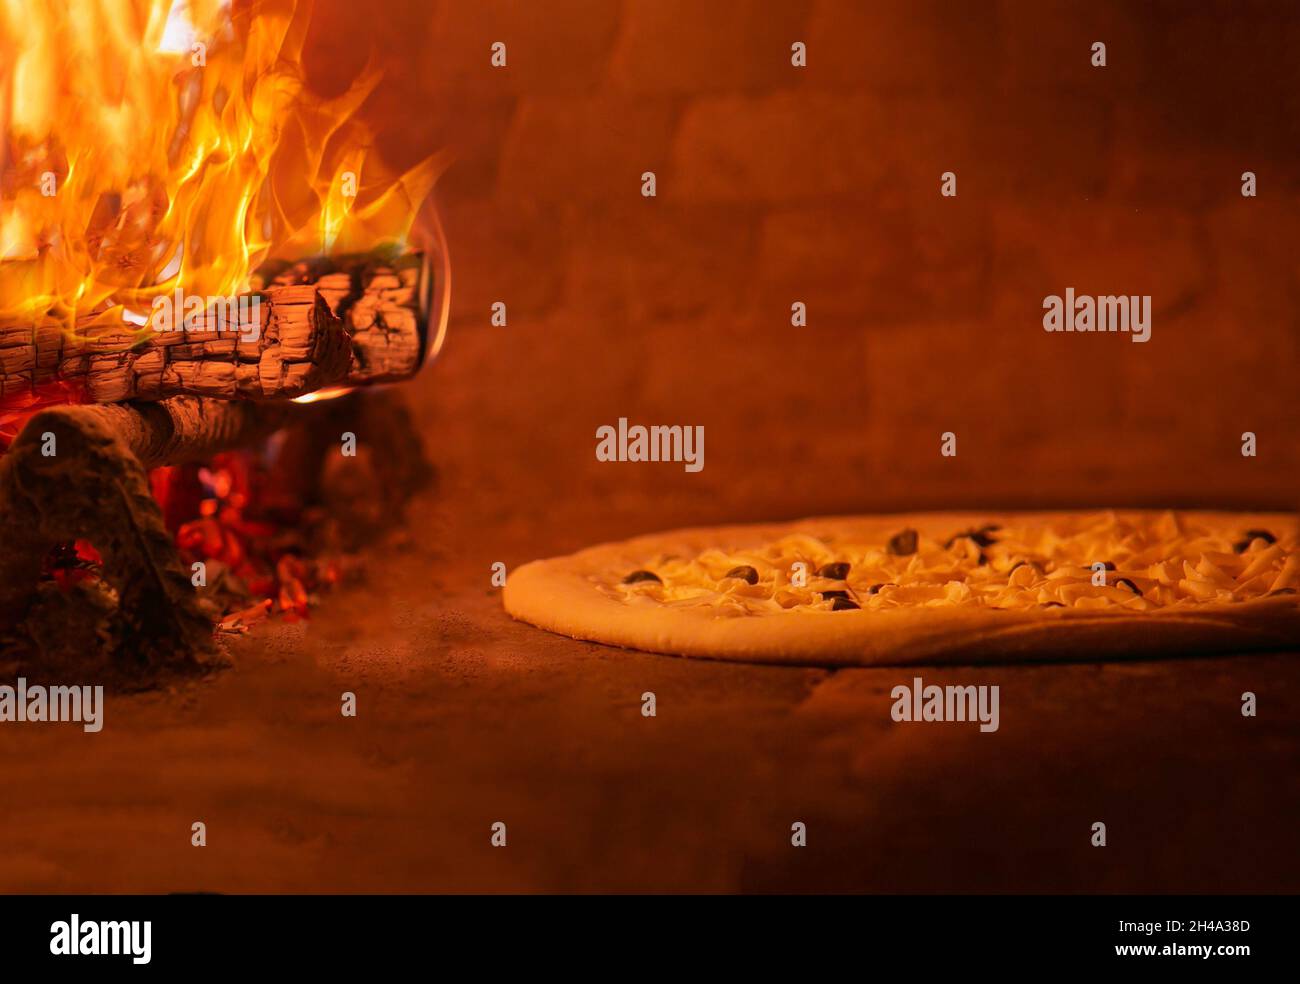 pizza near the fire in oven burning in flames Stock Photo